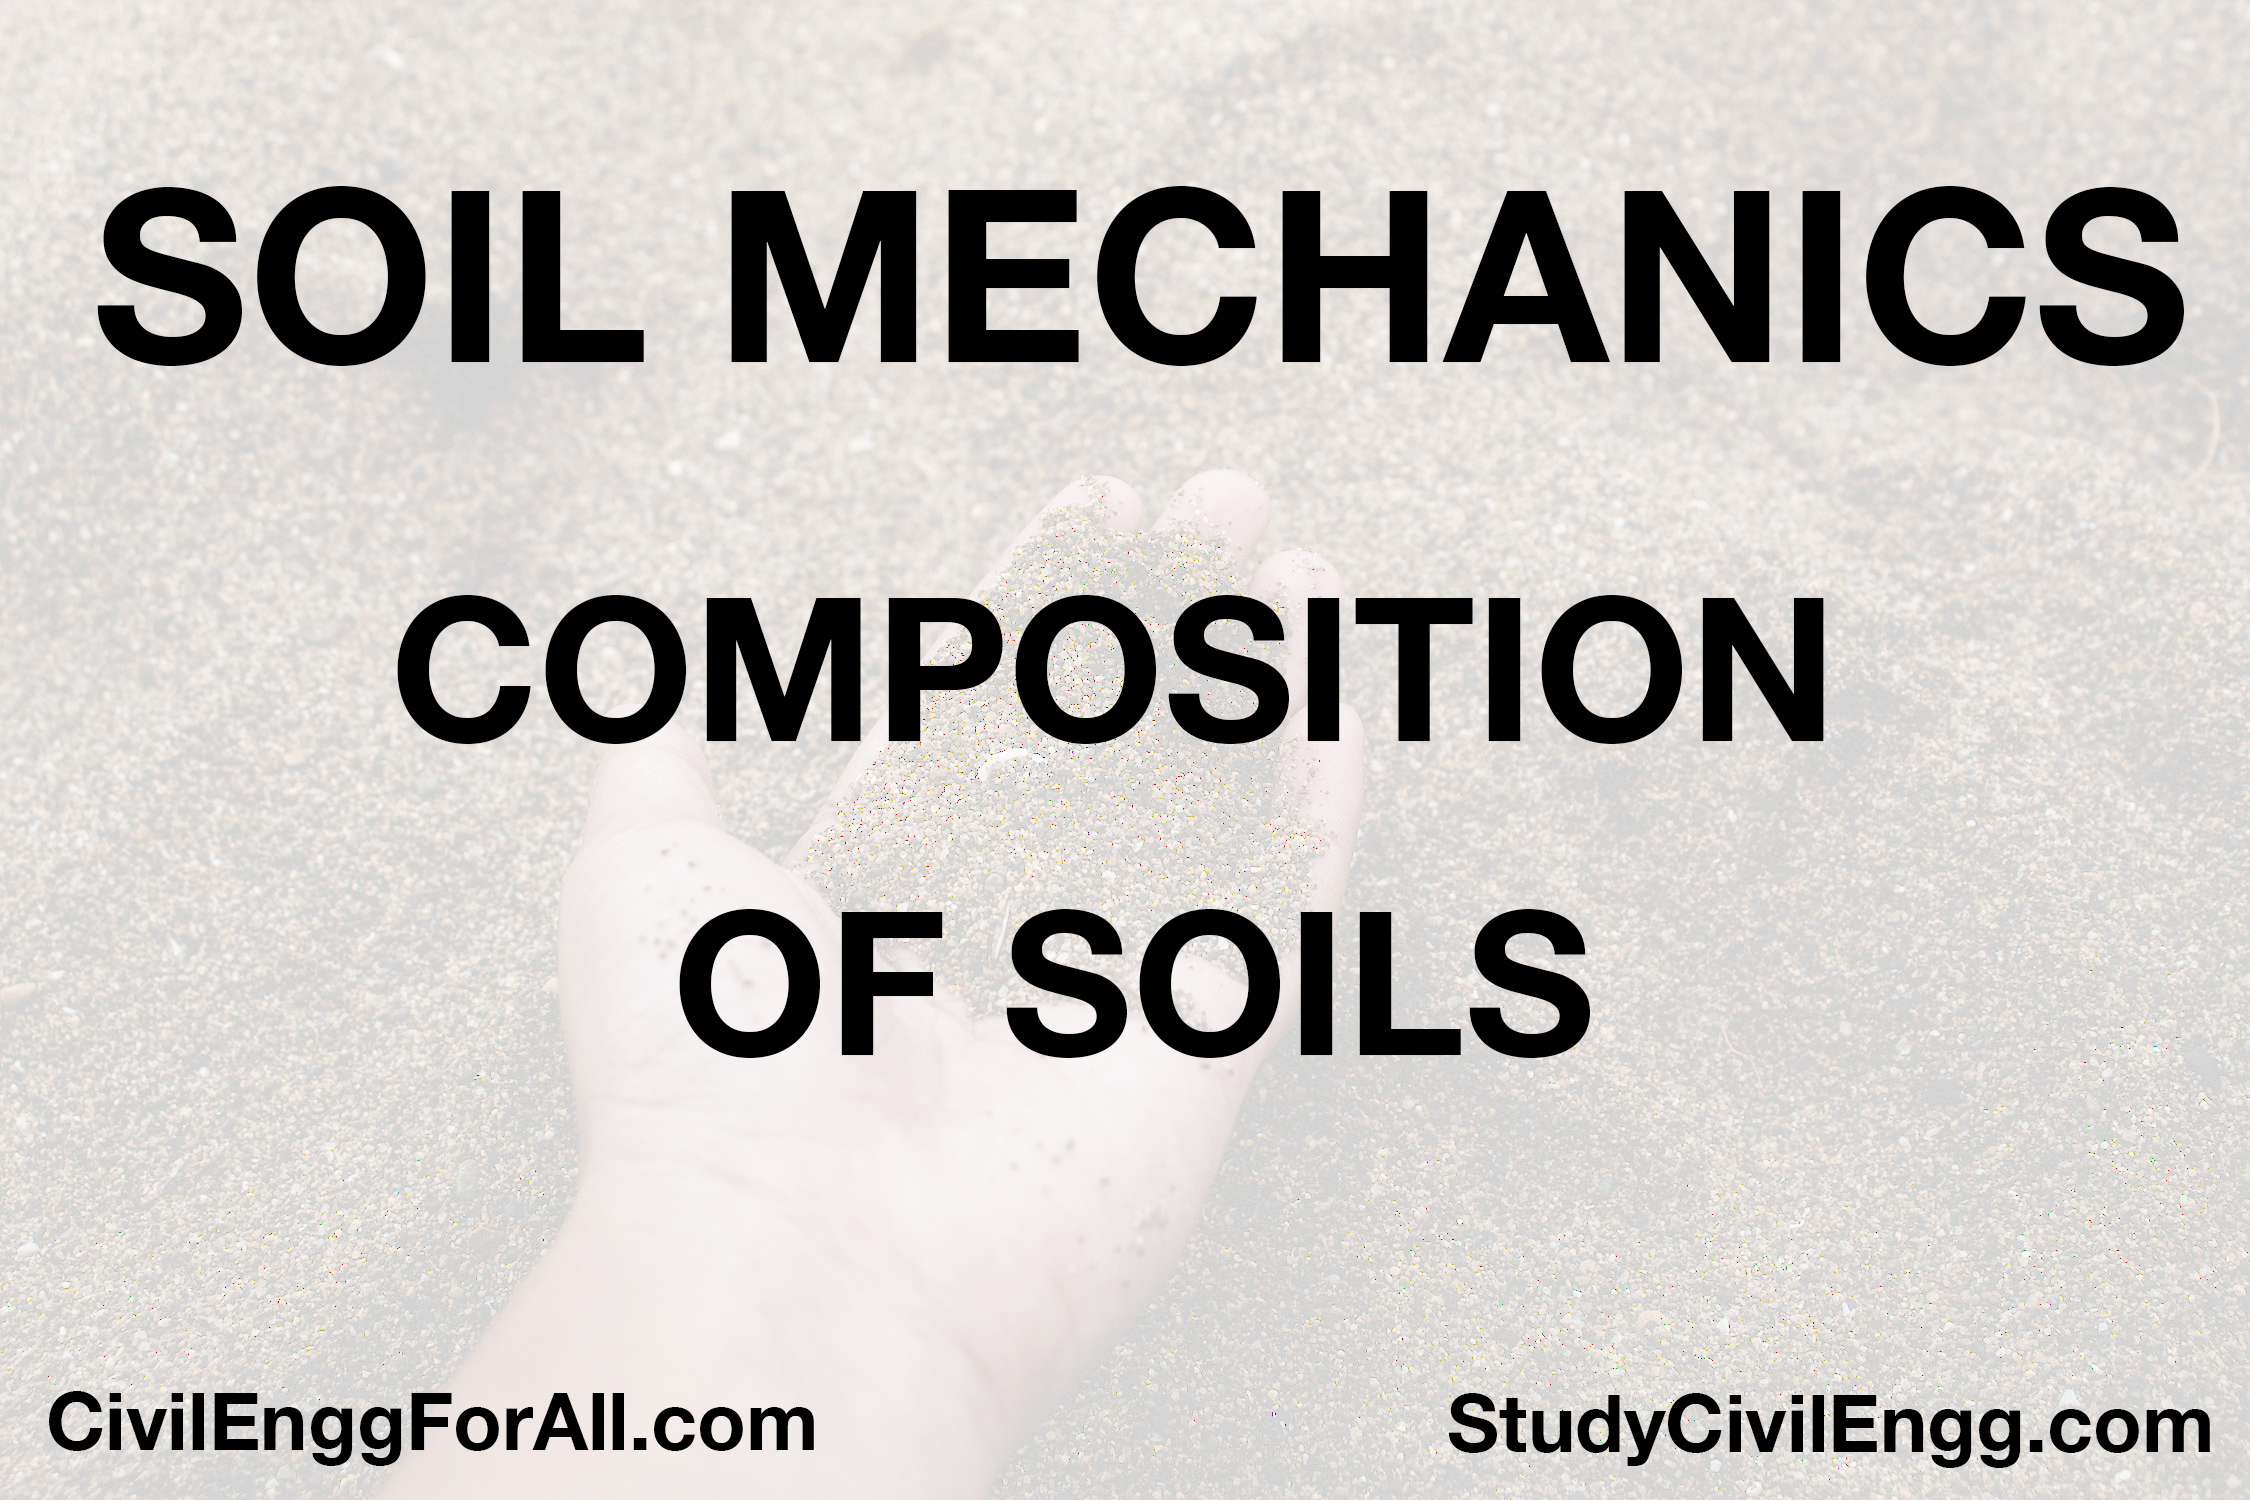 Composition of Soils - Two and Three Phase System - Soil Mechanics - StudyCivilEngg.com